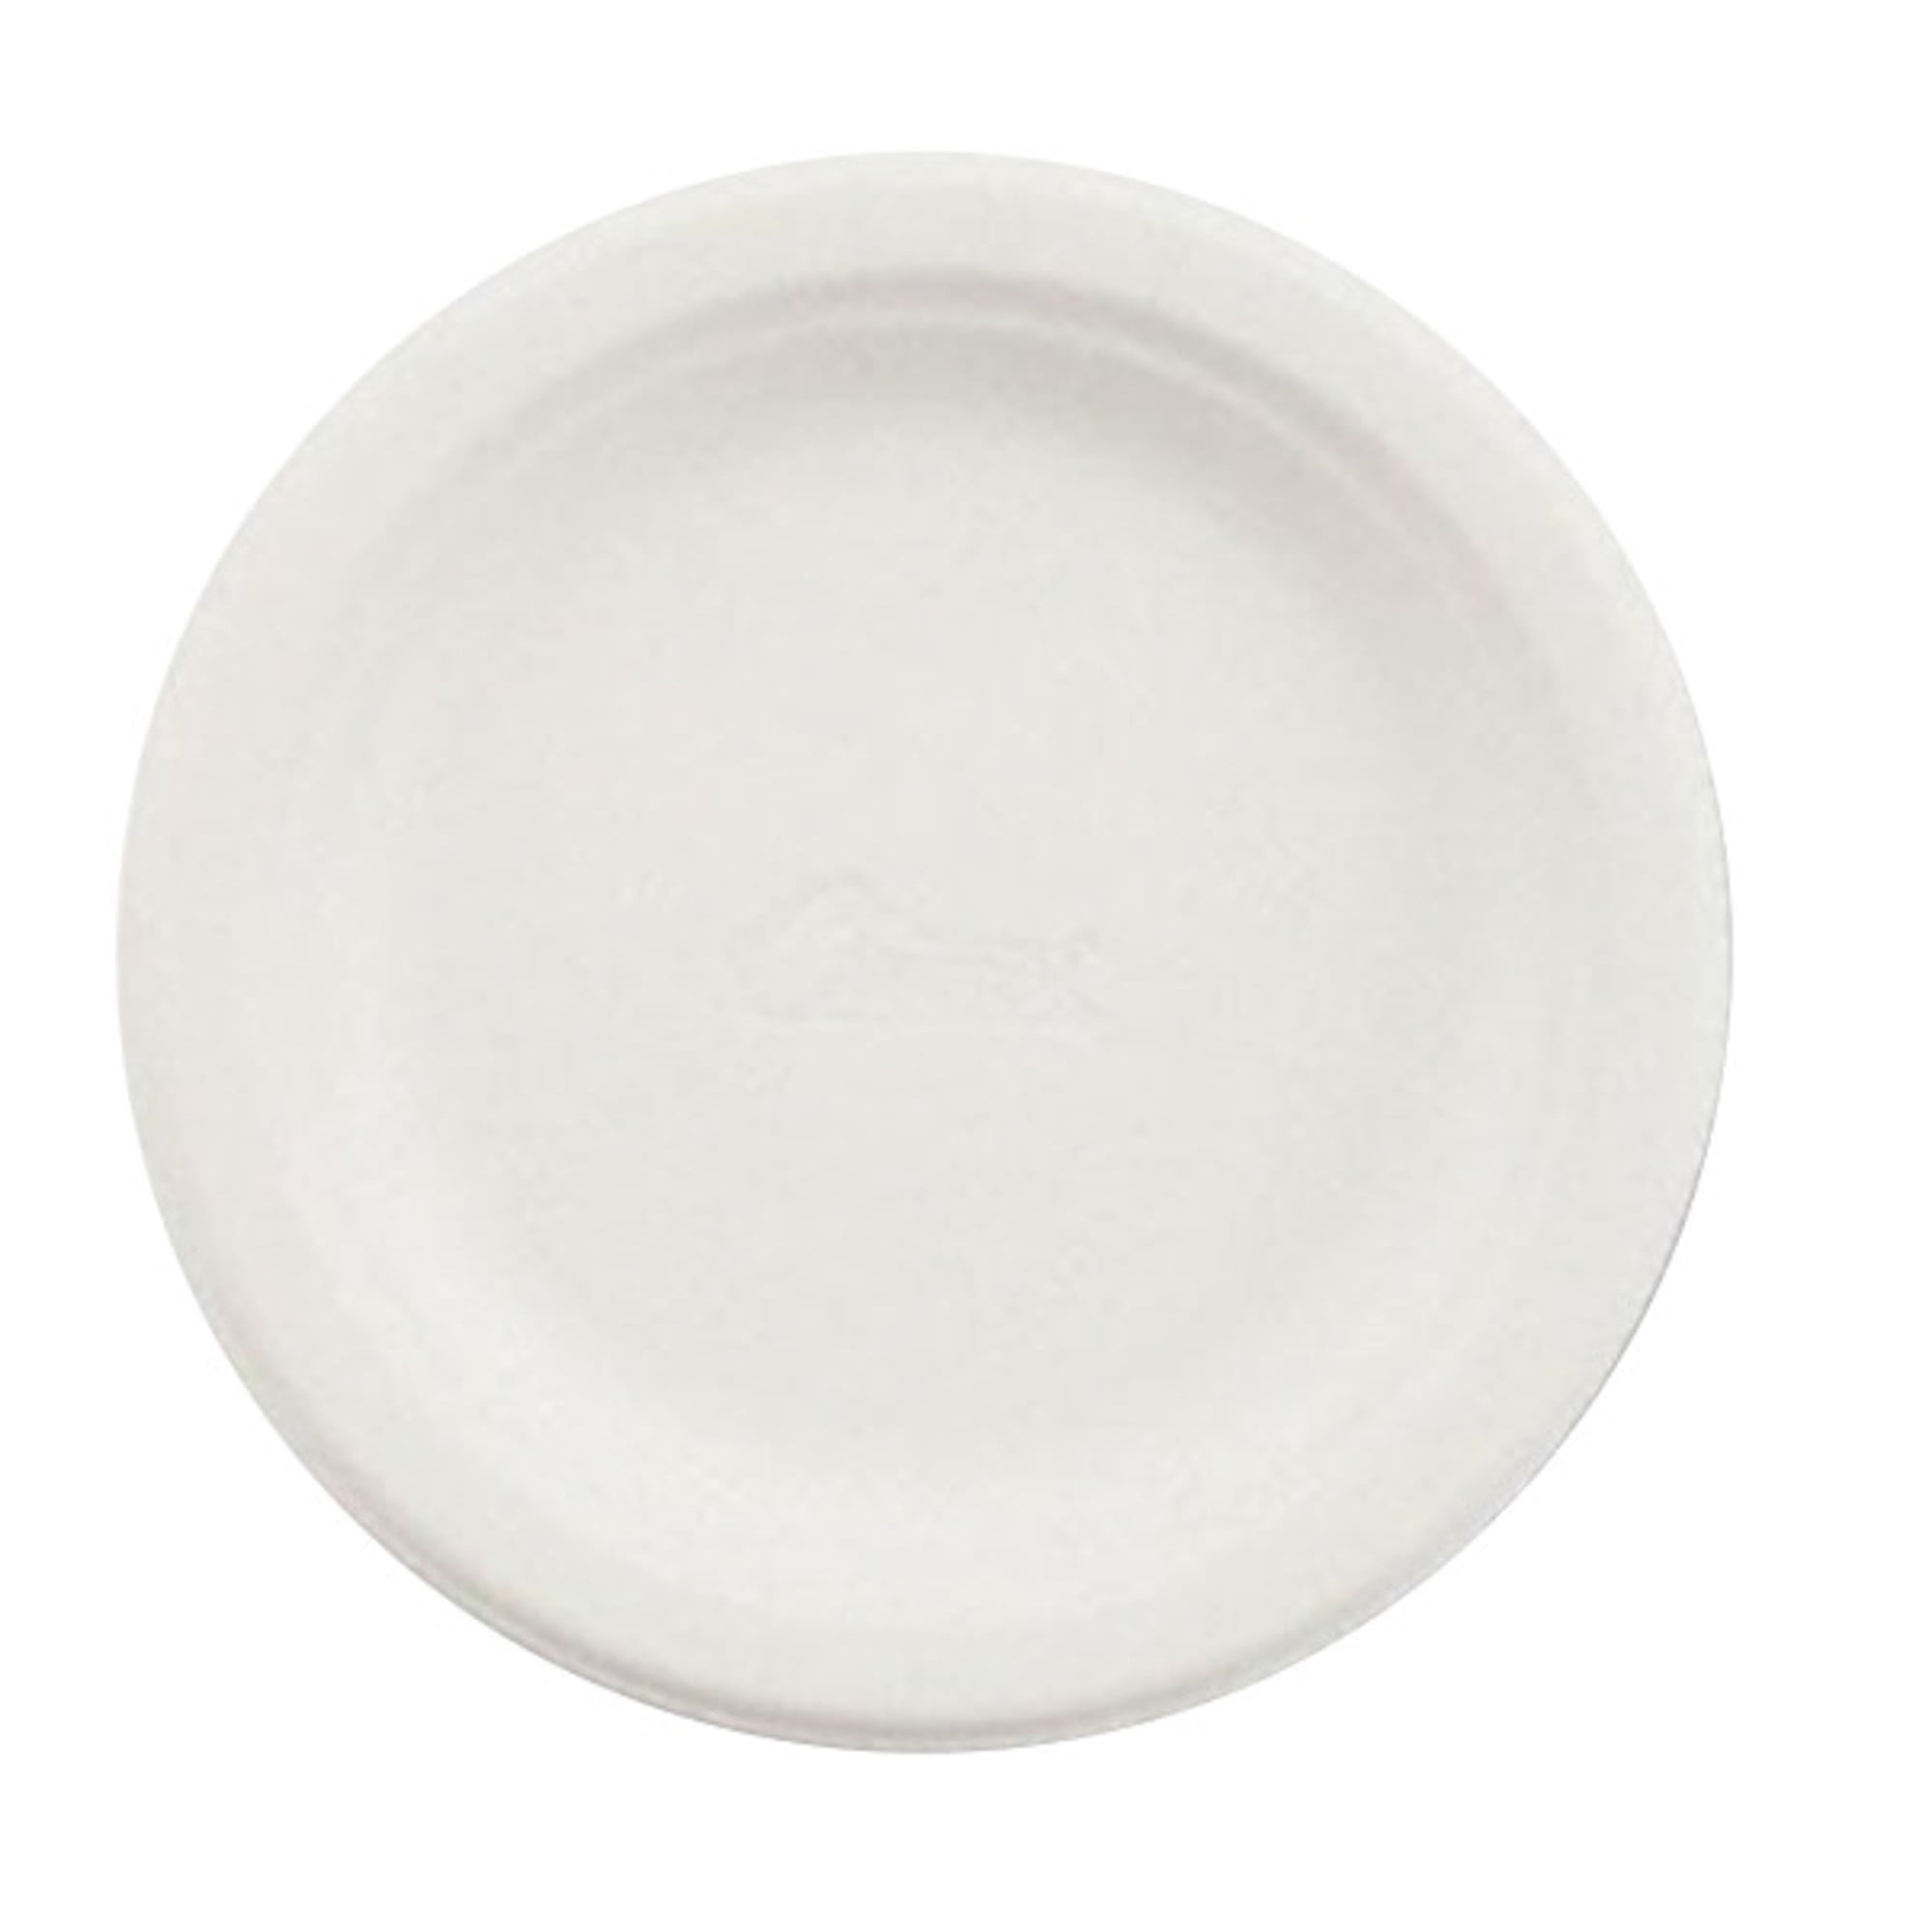 Chinet Classic Lunch Plate 8 3/4in (120 Count), Tableware & Serveware